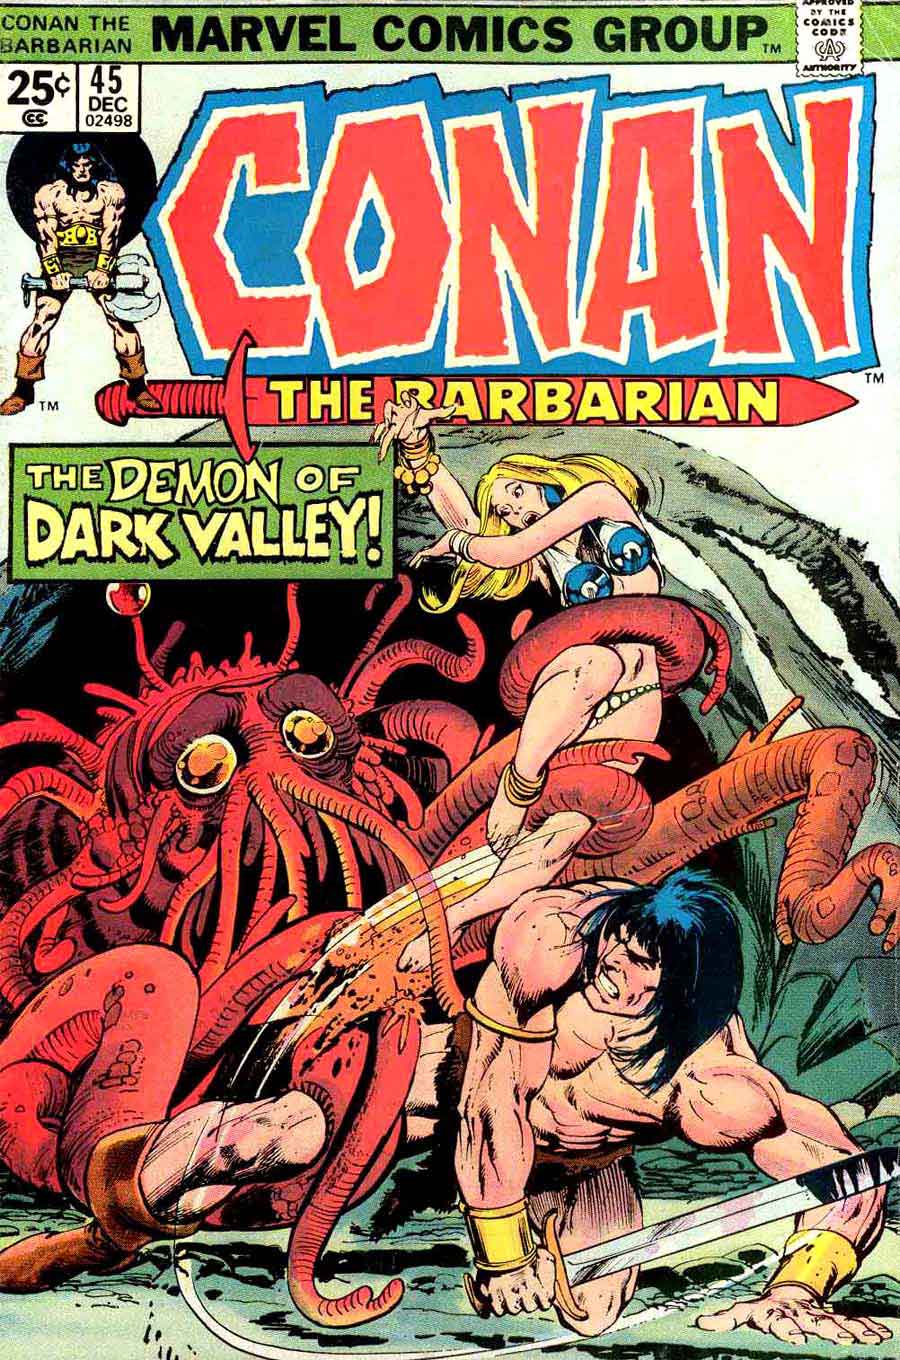 Conan the Barbarian v1 #45 marvel comic book cover art by Neal Adams